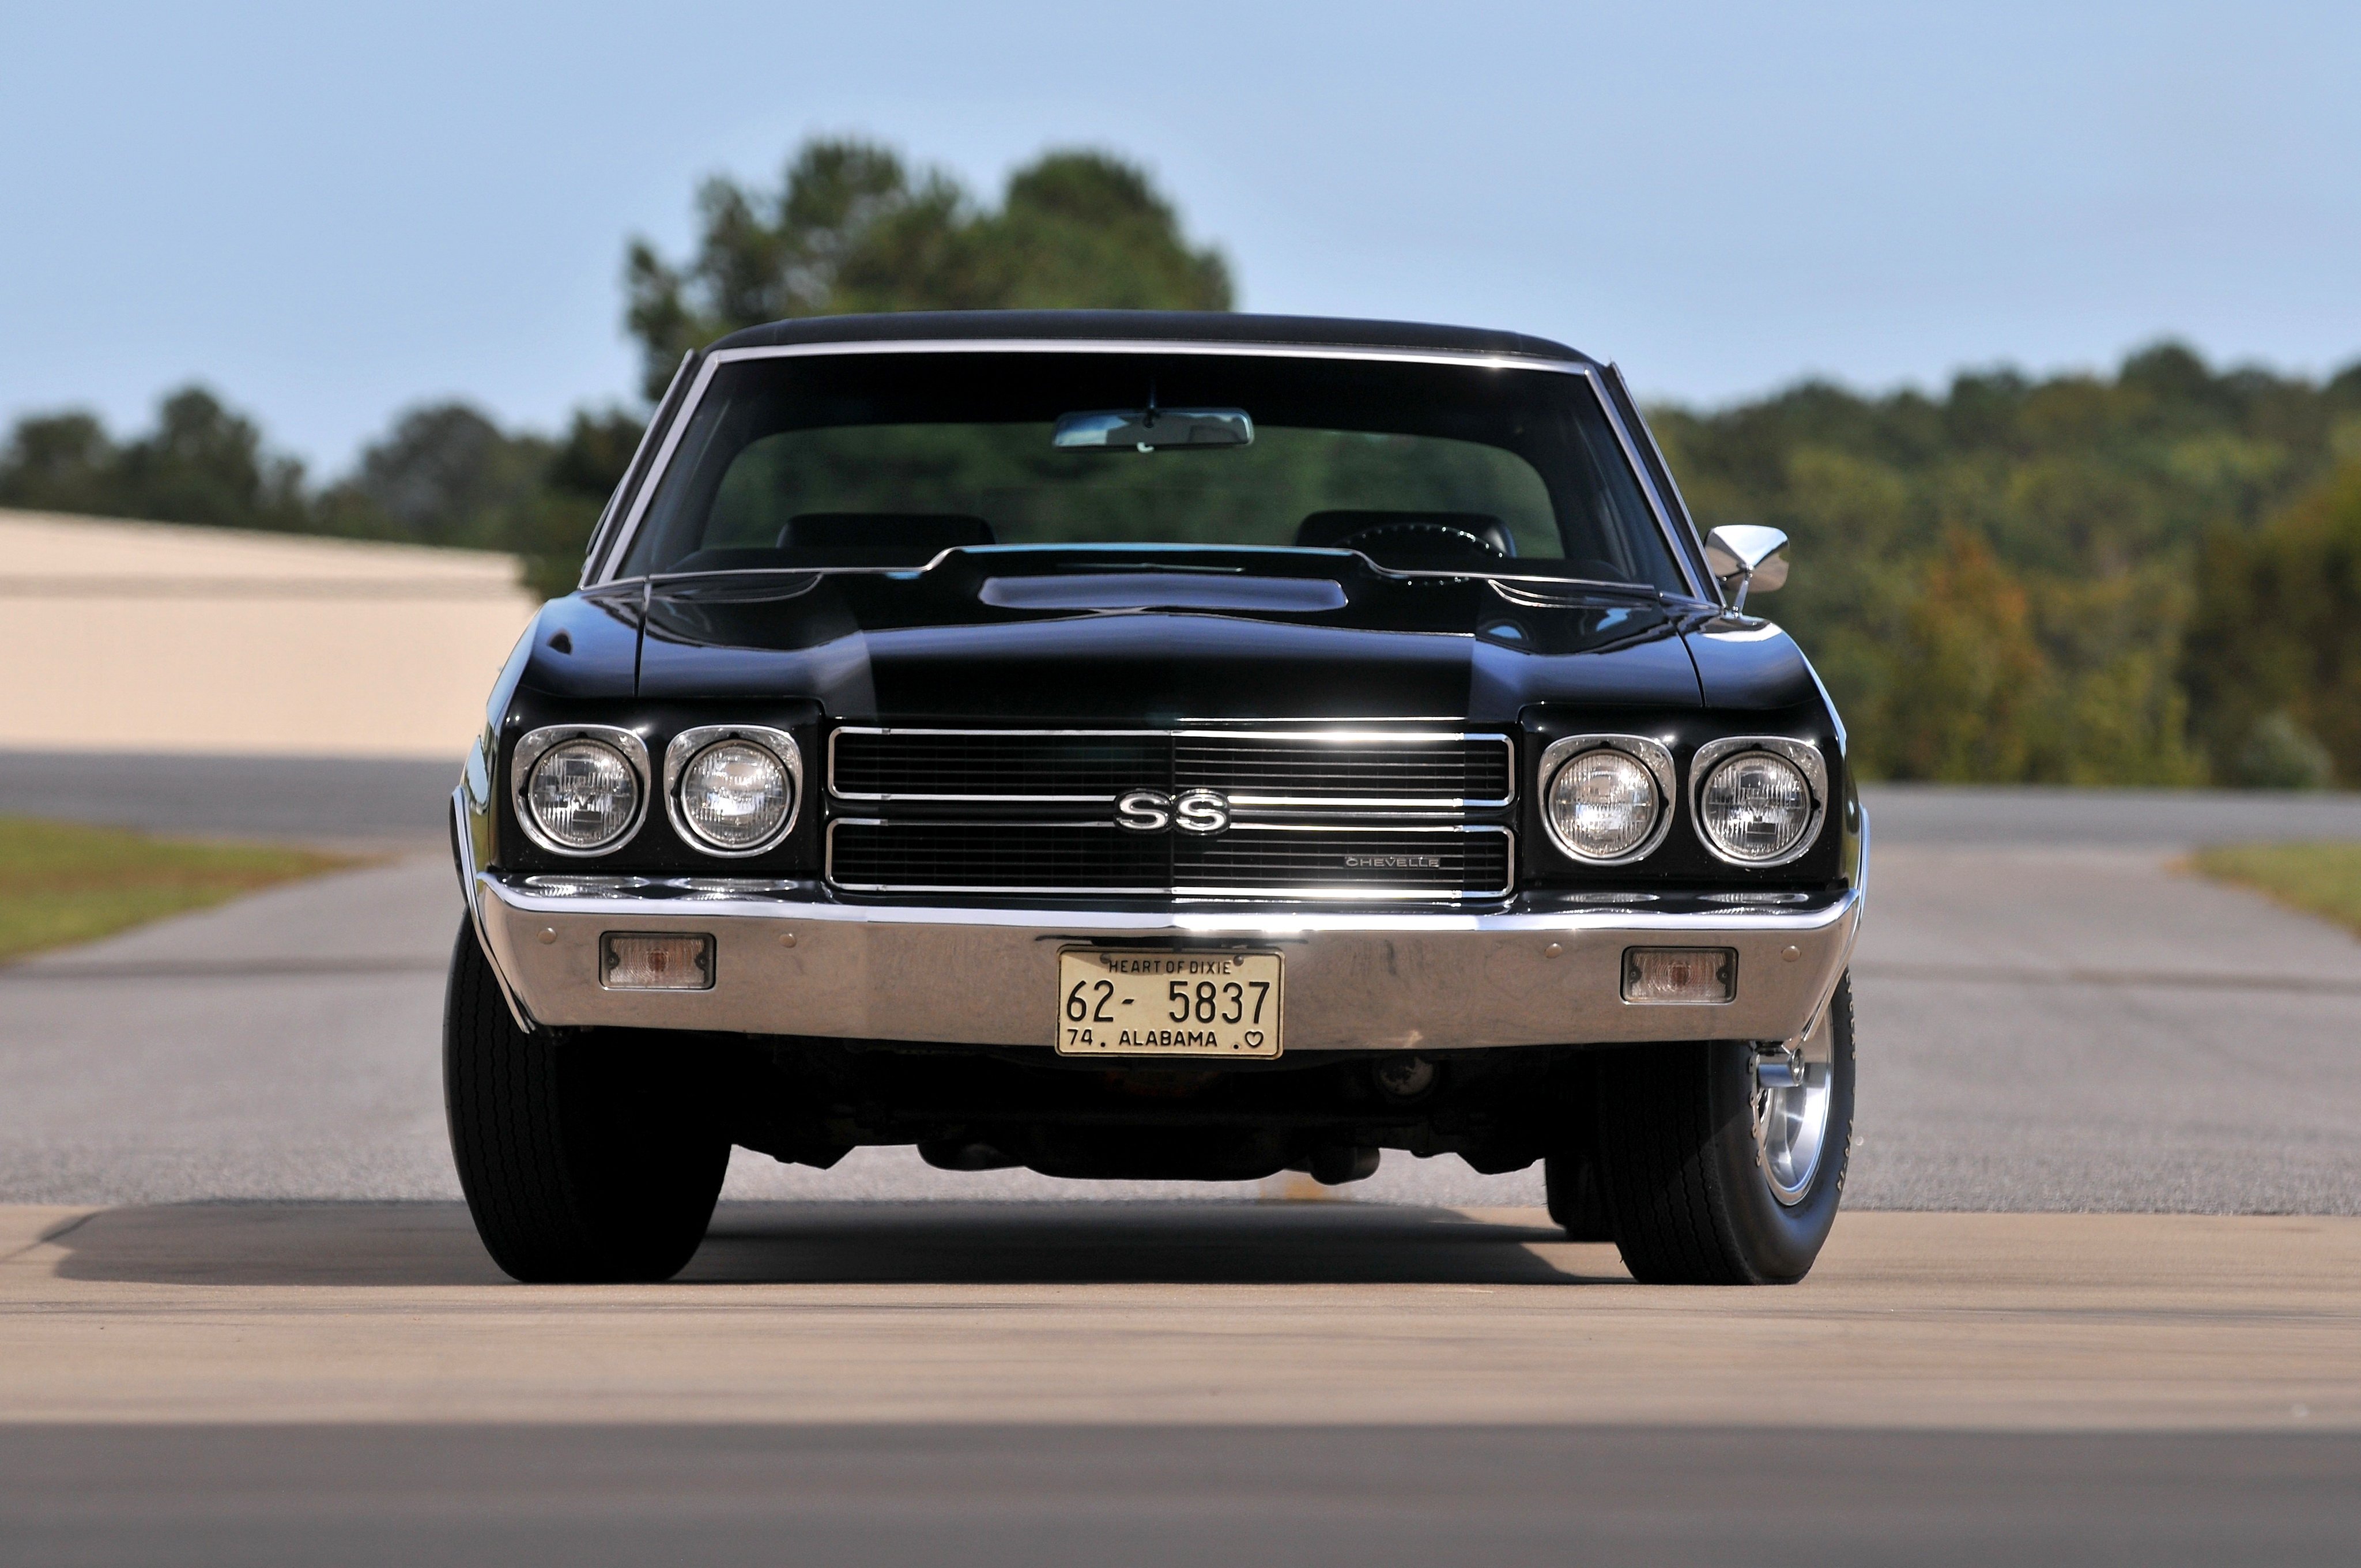 1970 Chevrolet Chevelle S S 454 LS6 Hardtop Coupe muscle classic